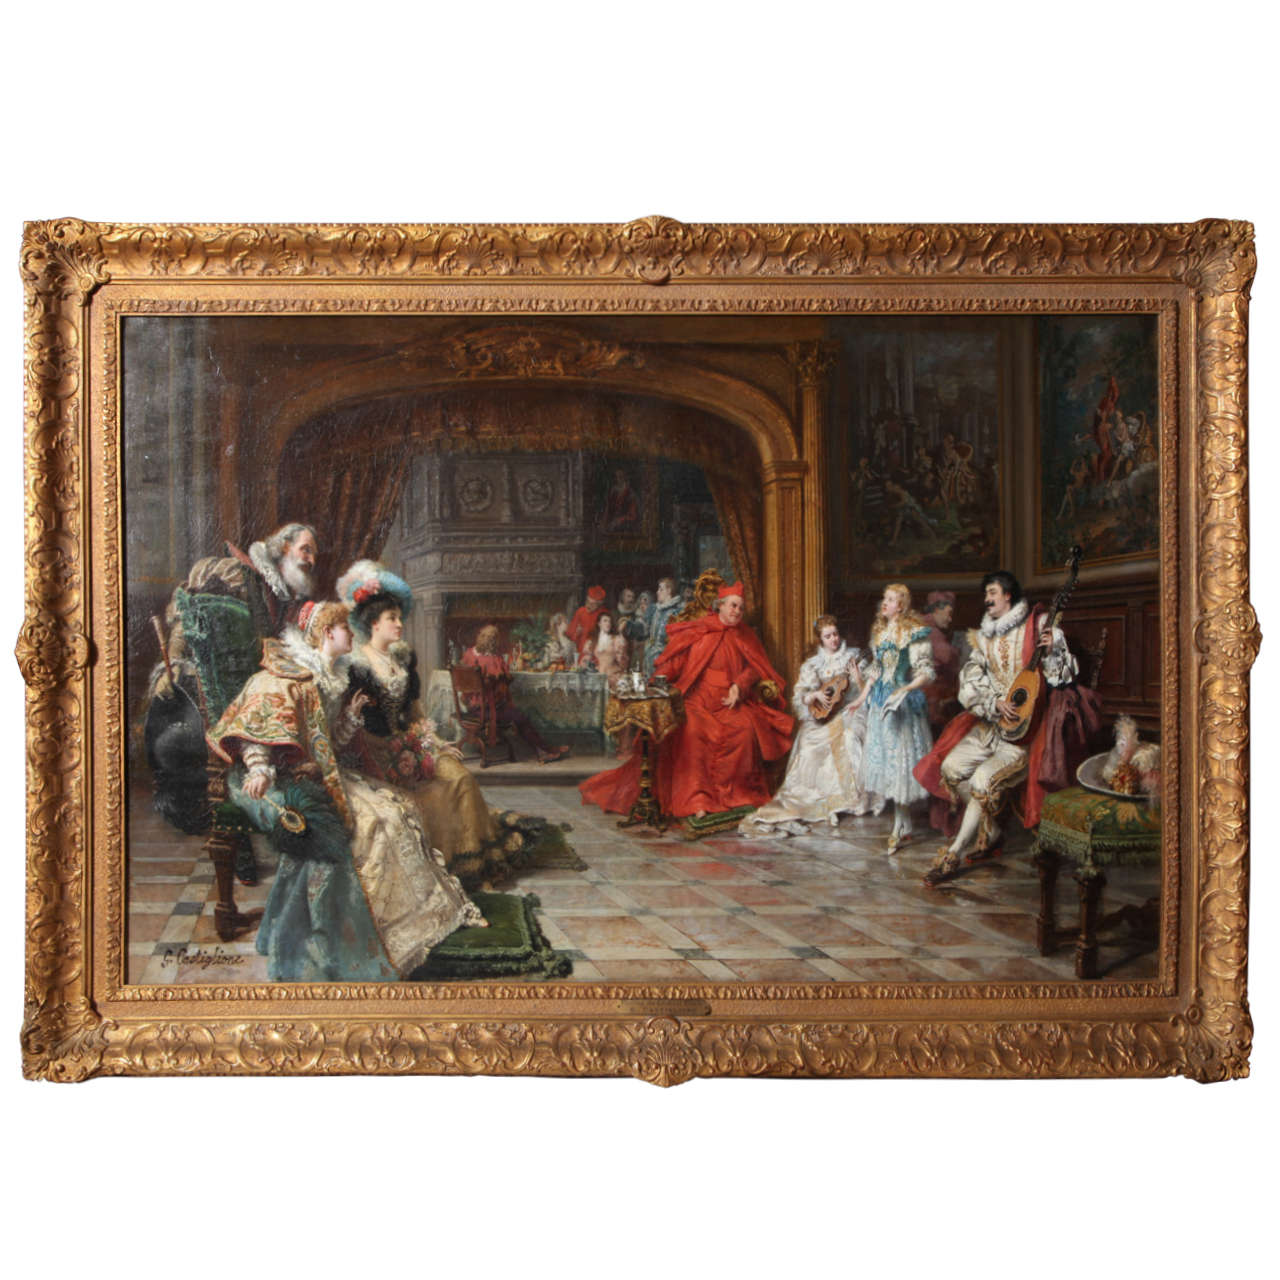 Giuseppe Castiglione 'The Cardinal's Court' Painting